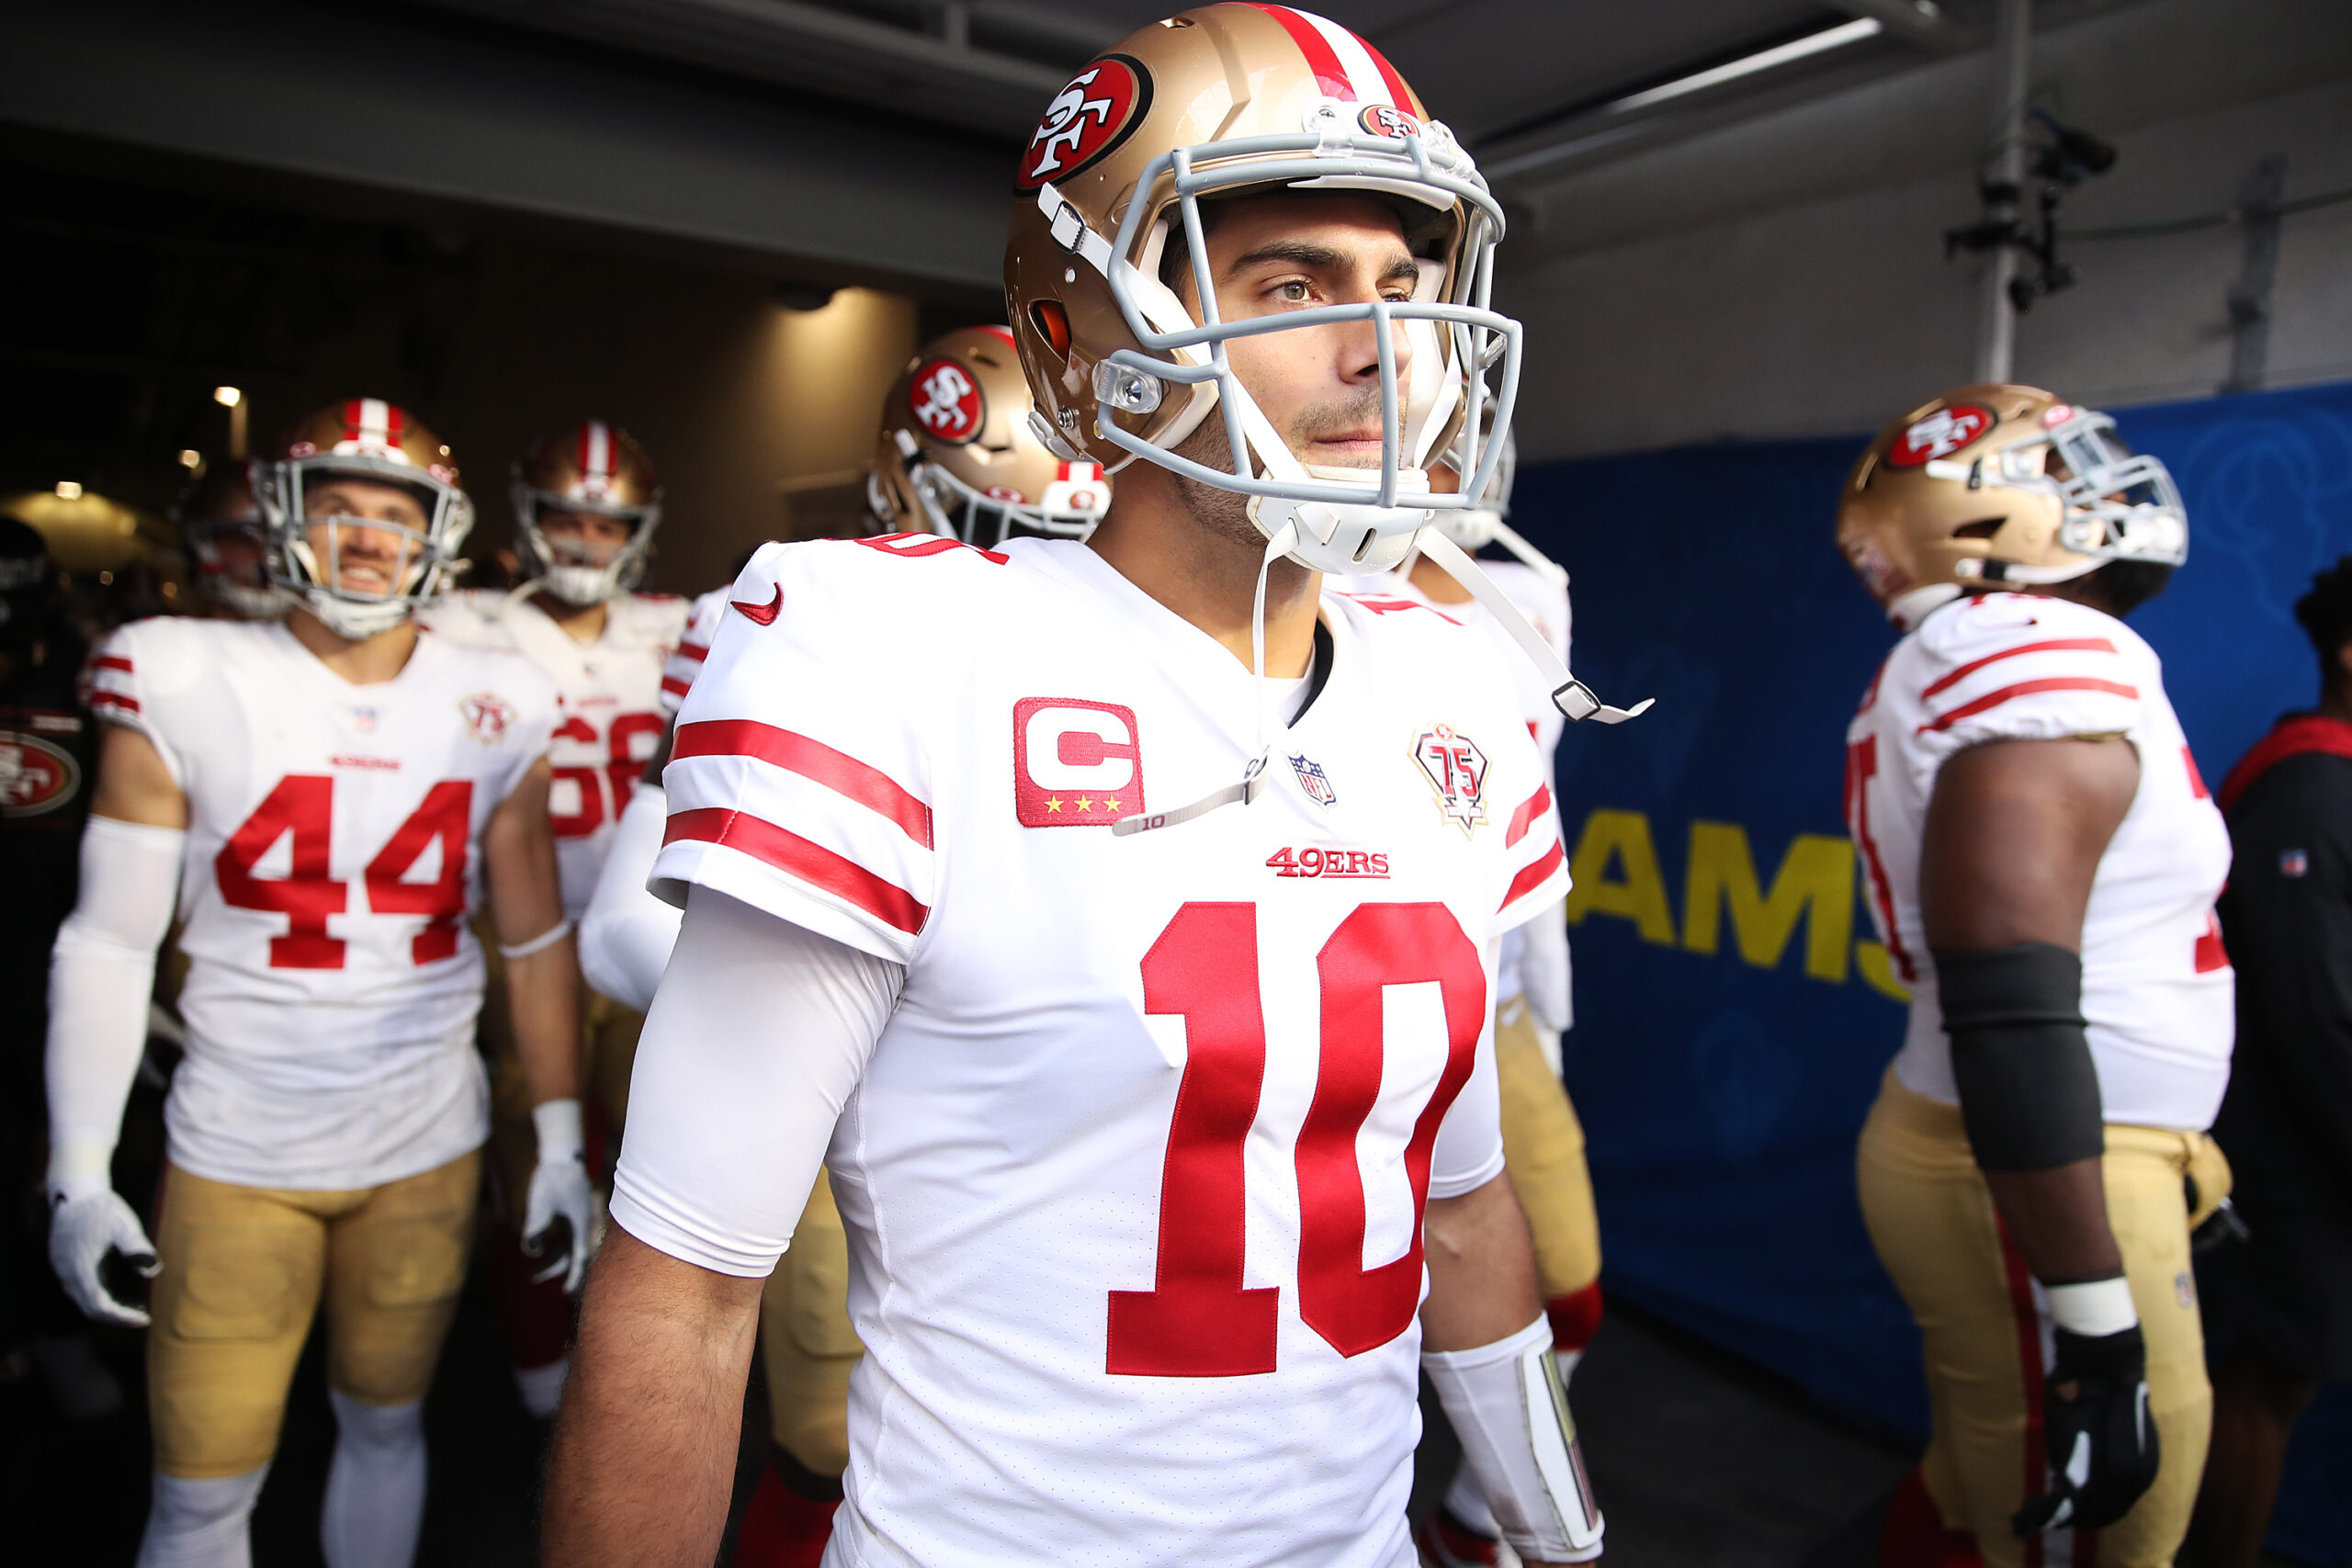 Jimmy Garoppolo #10 of the San Francisco 49ers prepares to take the field with teammates before the NFC Championship Game against the Los Angeles Rams at SoFi Stadium on January 30, 2022 in Inglewood, California.